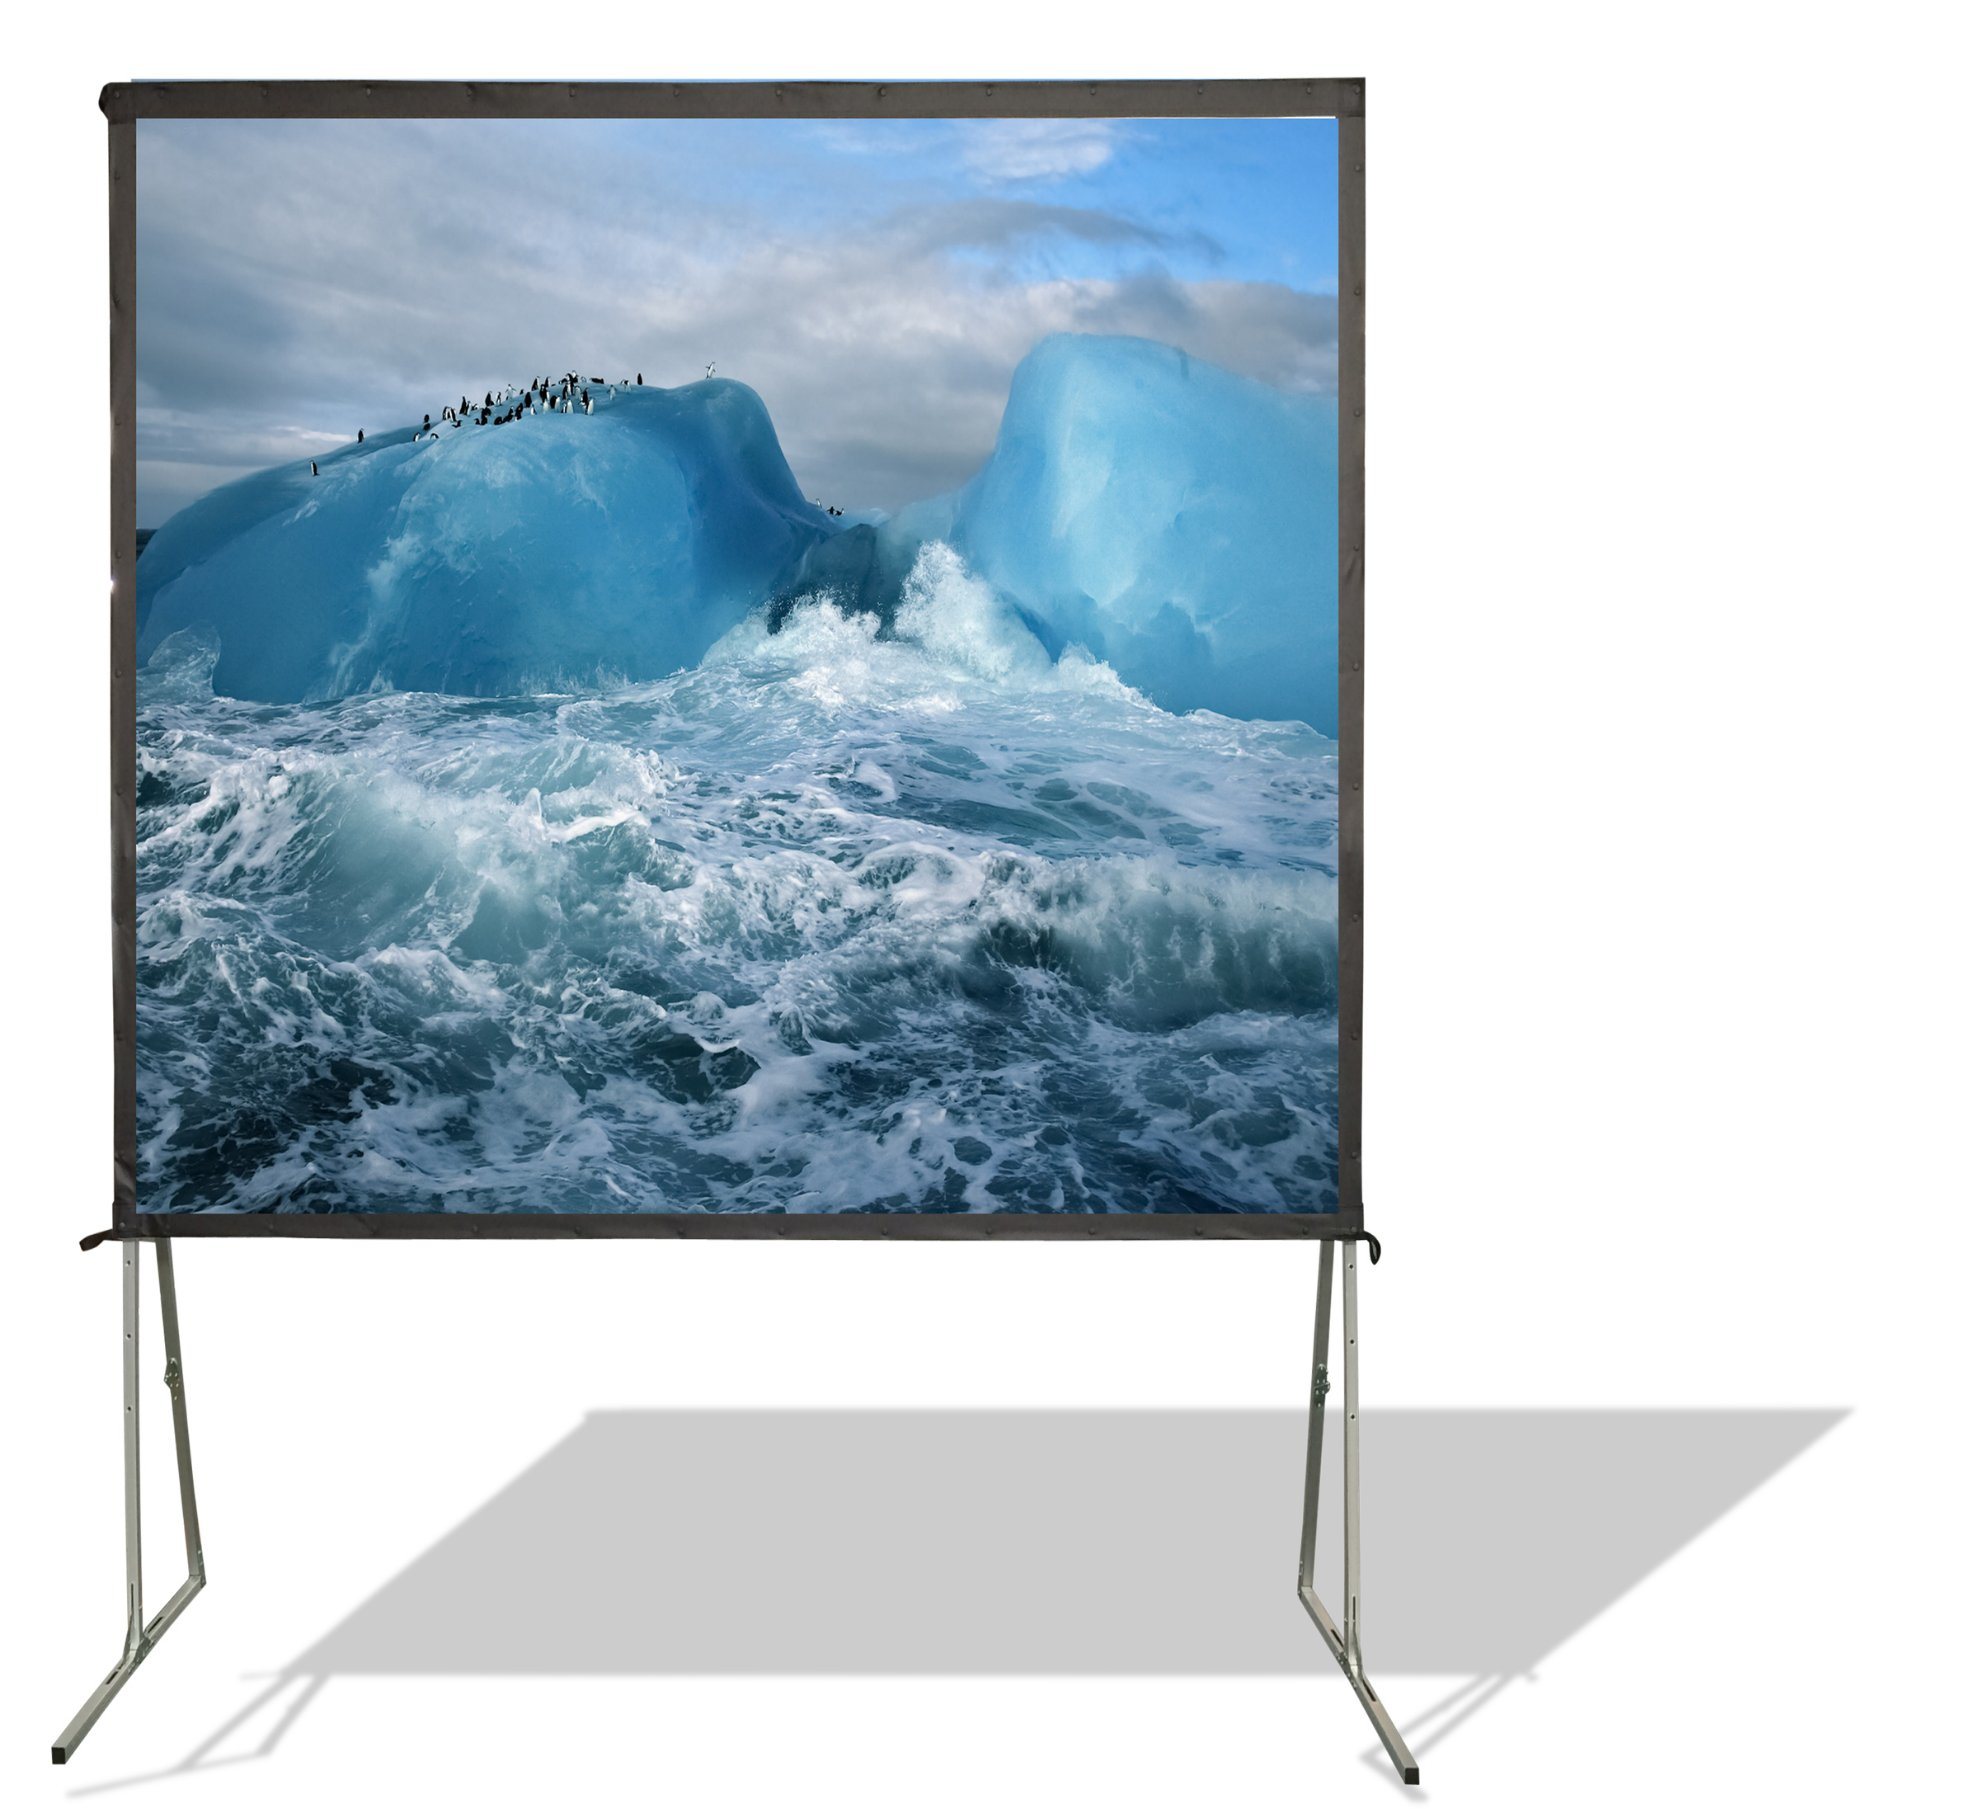 Adjustable Removable Folding Frame with Stand Projector Screen Super Quality